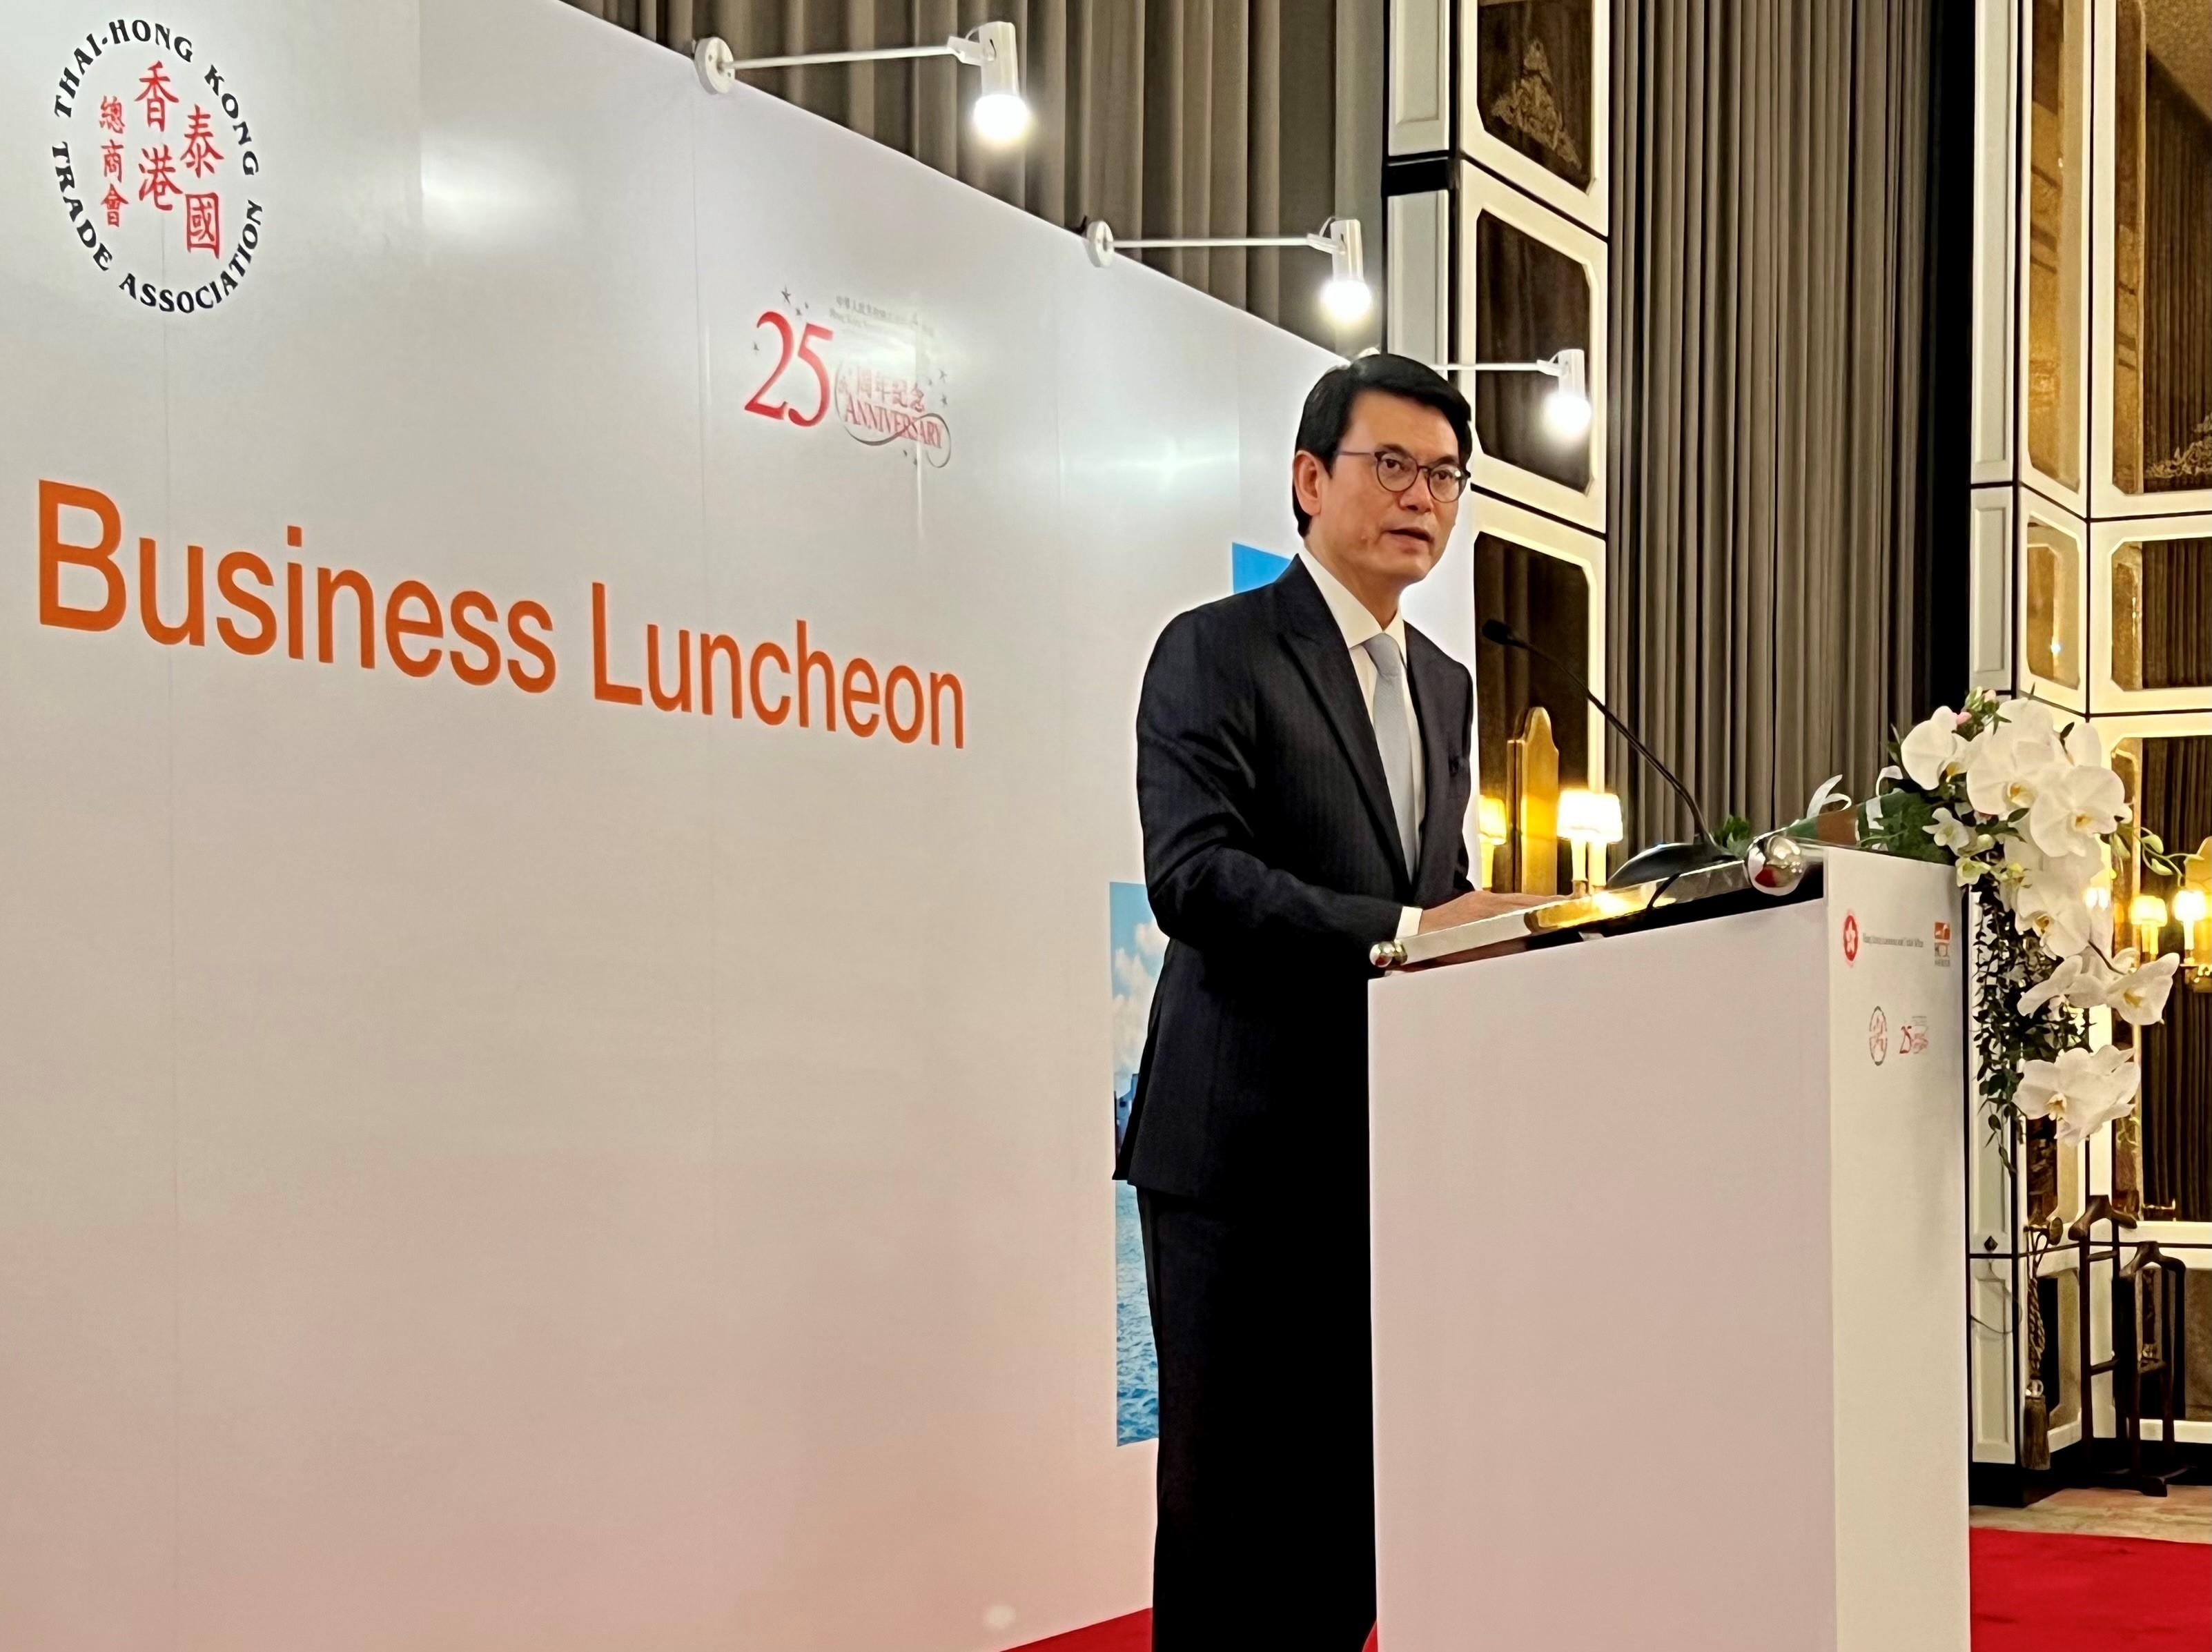 The Secretary for Commerce and Economic Development, Mr Edward Yau, continued to promote Hong Kong's business opportunities on his visit to Bangkok, Thailand, today (May 20). Photo shows Mr Yau speaking at a business luncheon to celebrate the 25th anniversary of the establishment of the Hong Kong Special Administrative Region.